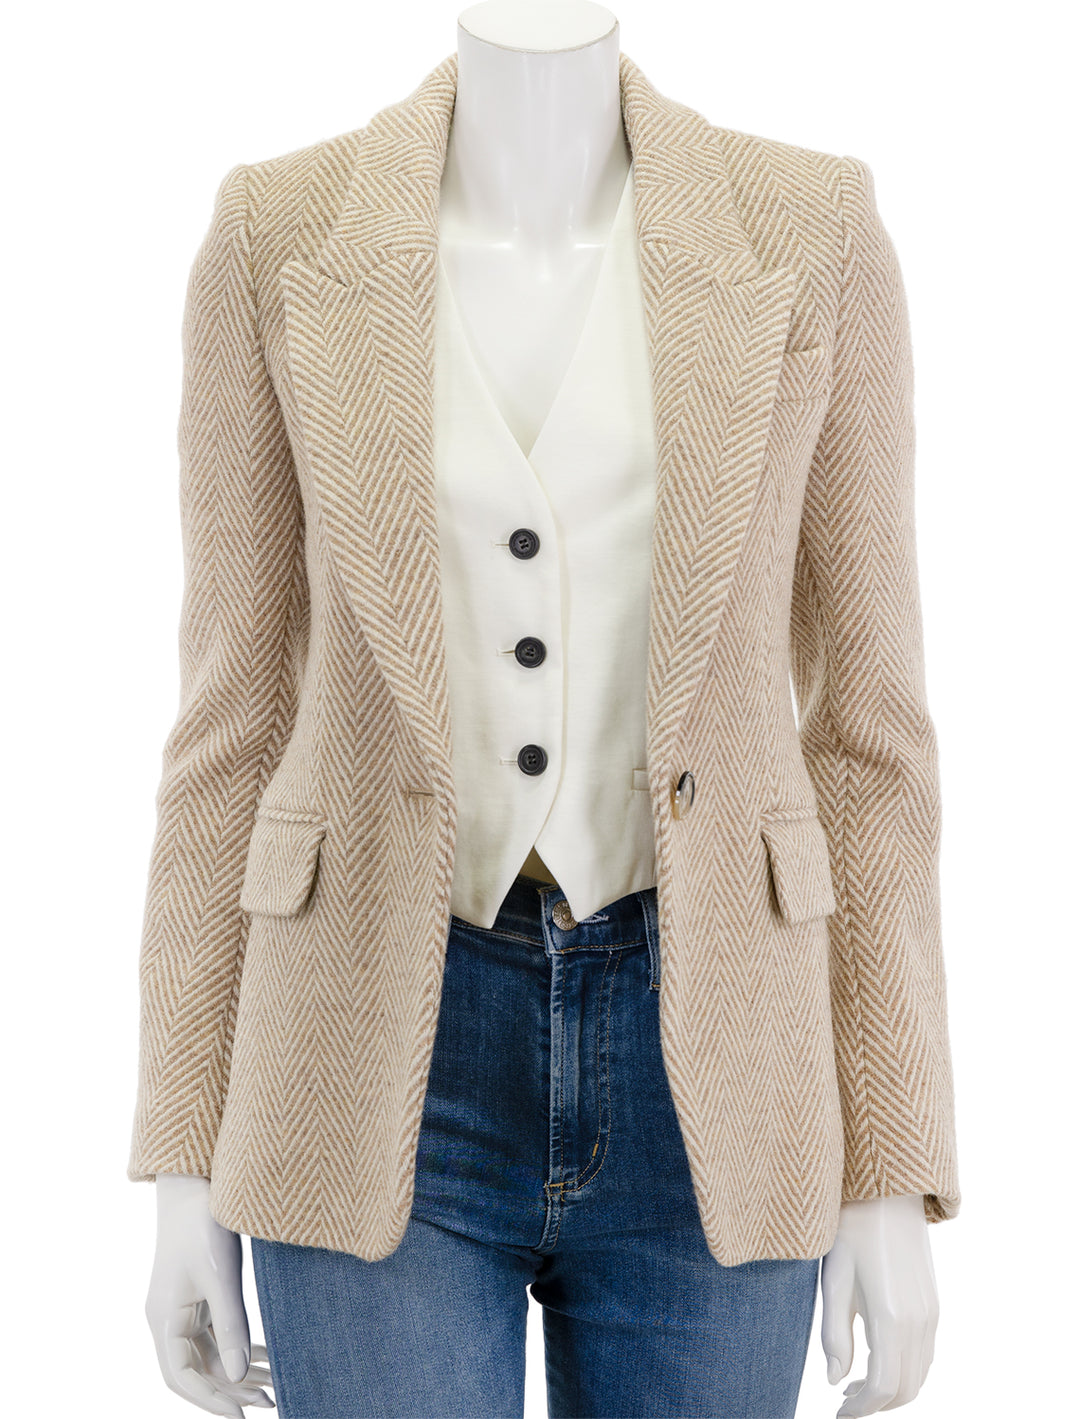 Front view of Isabel Marant Etoile's kerstin blazer in toffee, unbuttoned.